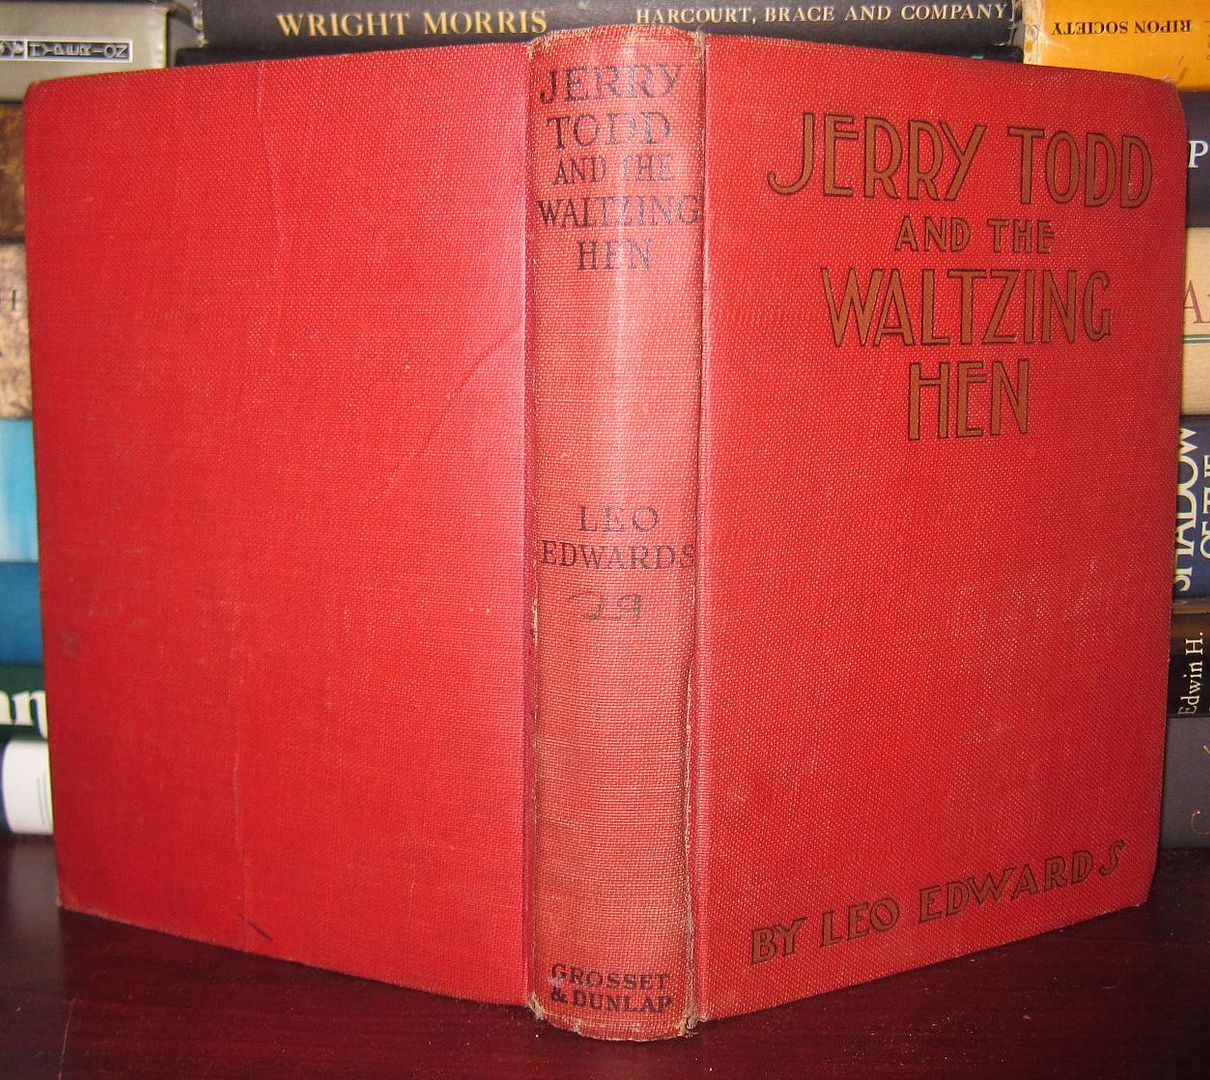 EDWARDS, LEO - Jerry Todd and the Waltzing Hen